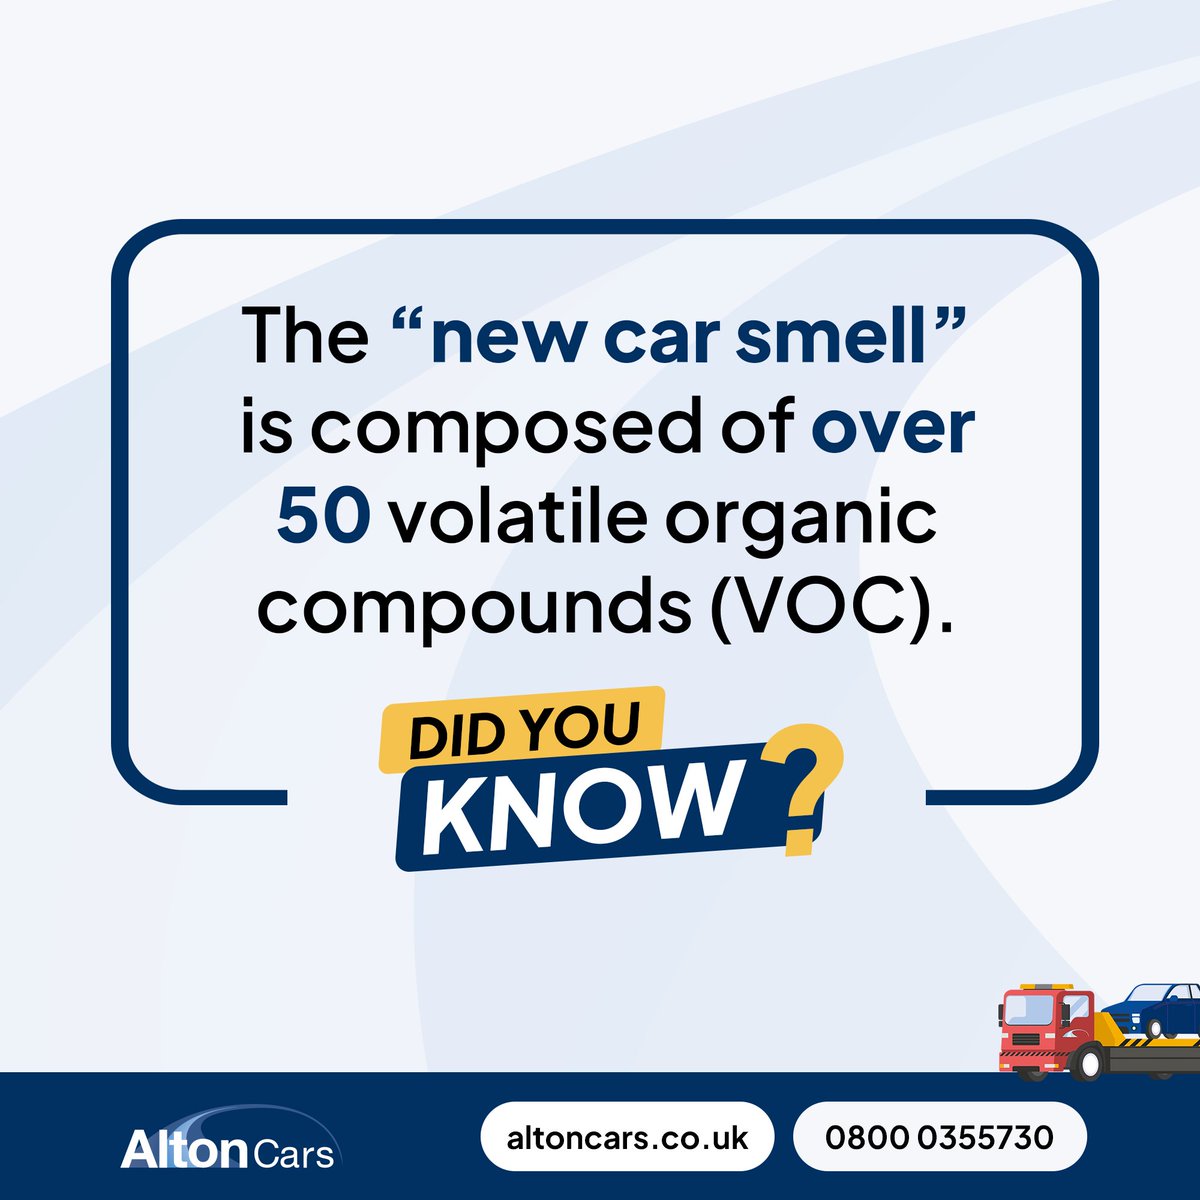 Sniff responsibly though, as prolonged exposure might not be so healthy! 

Mmm, nothing like the sweet smell of 50 VOCs in the morning! ✨

#DidYouKnow #Fact #NewCar #NewCarSmell #AltonCars